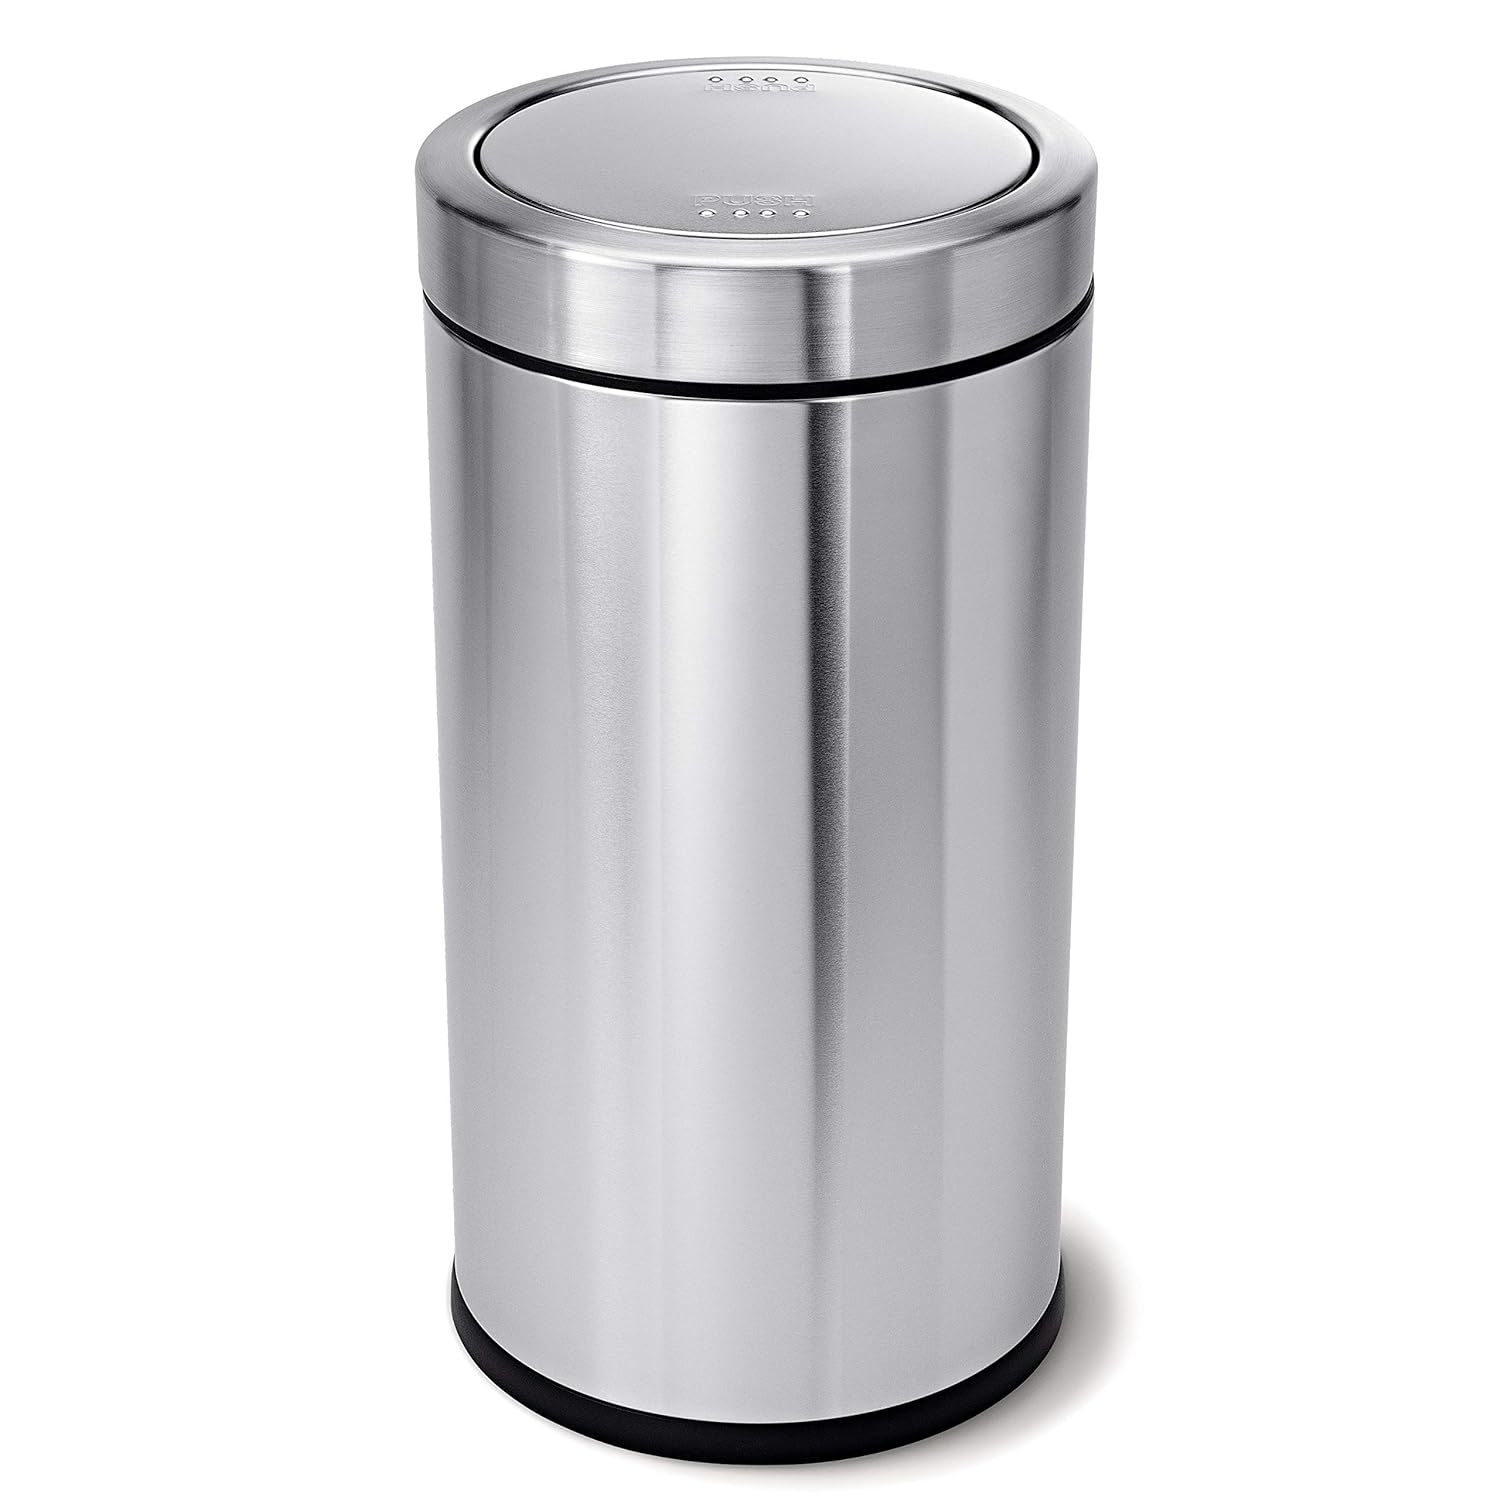 simplehuman 55 Liter / 14.5 Gallon Commercial Swing Top Trash Can, ADA-Compliant, 11-20 Gallons, Brushed Stainless Steel